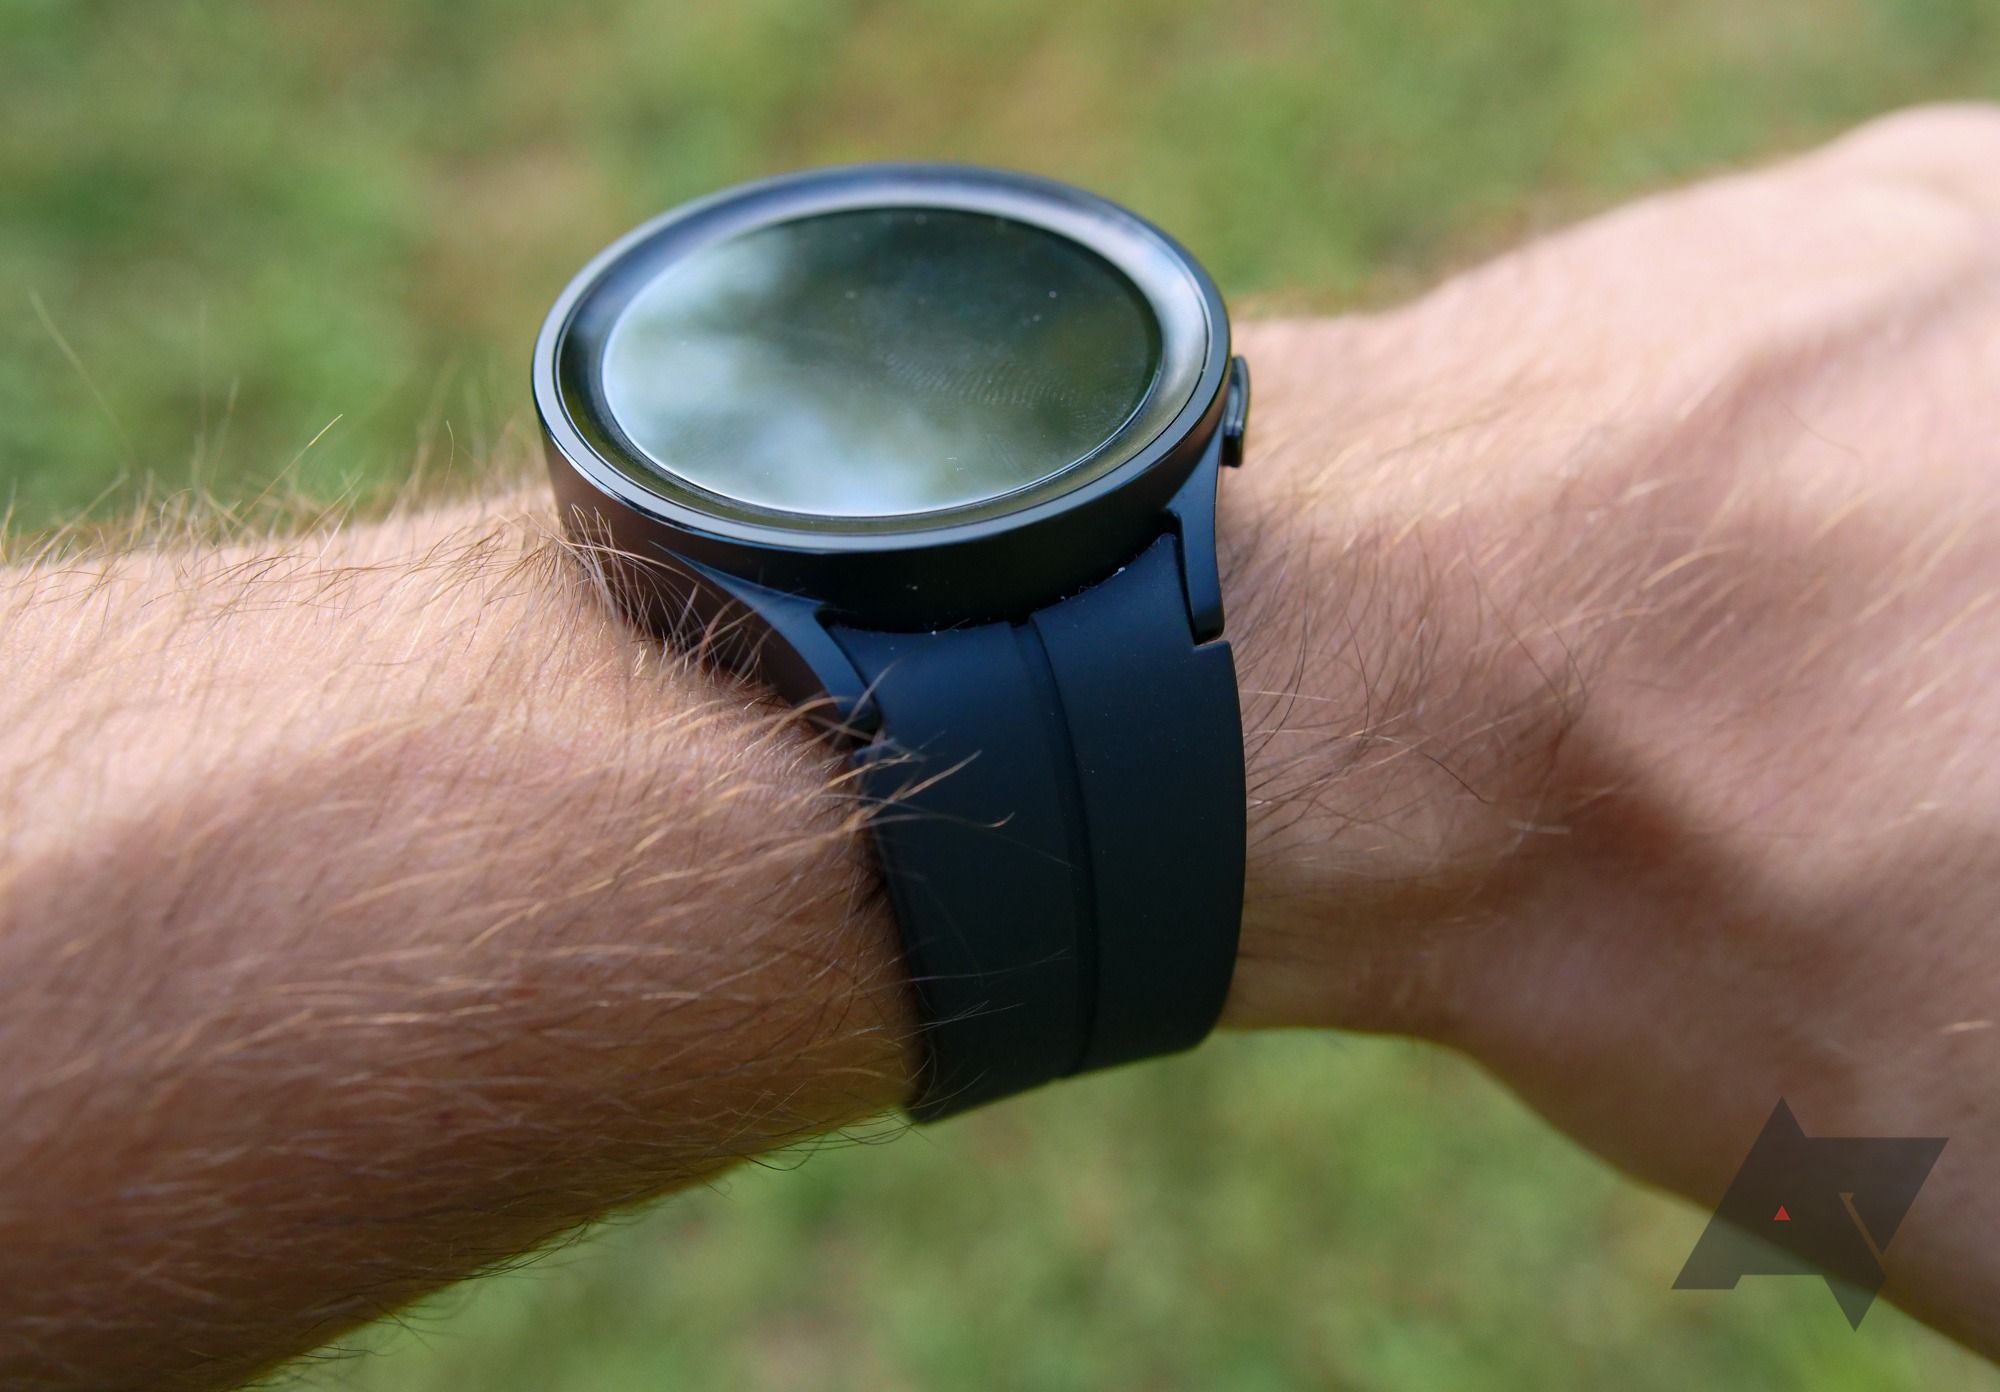 A large smartwatch on a person's wrist.